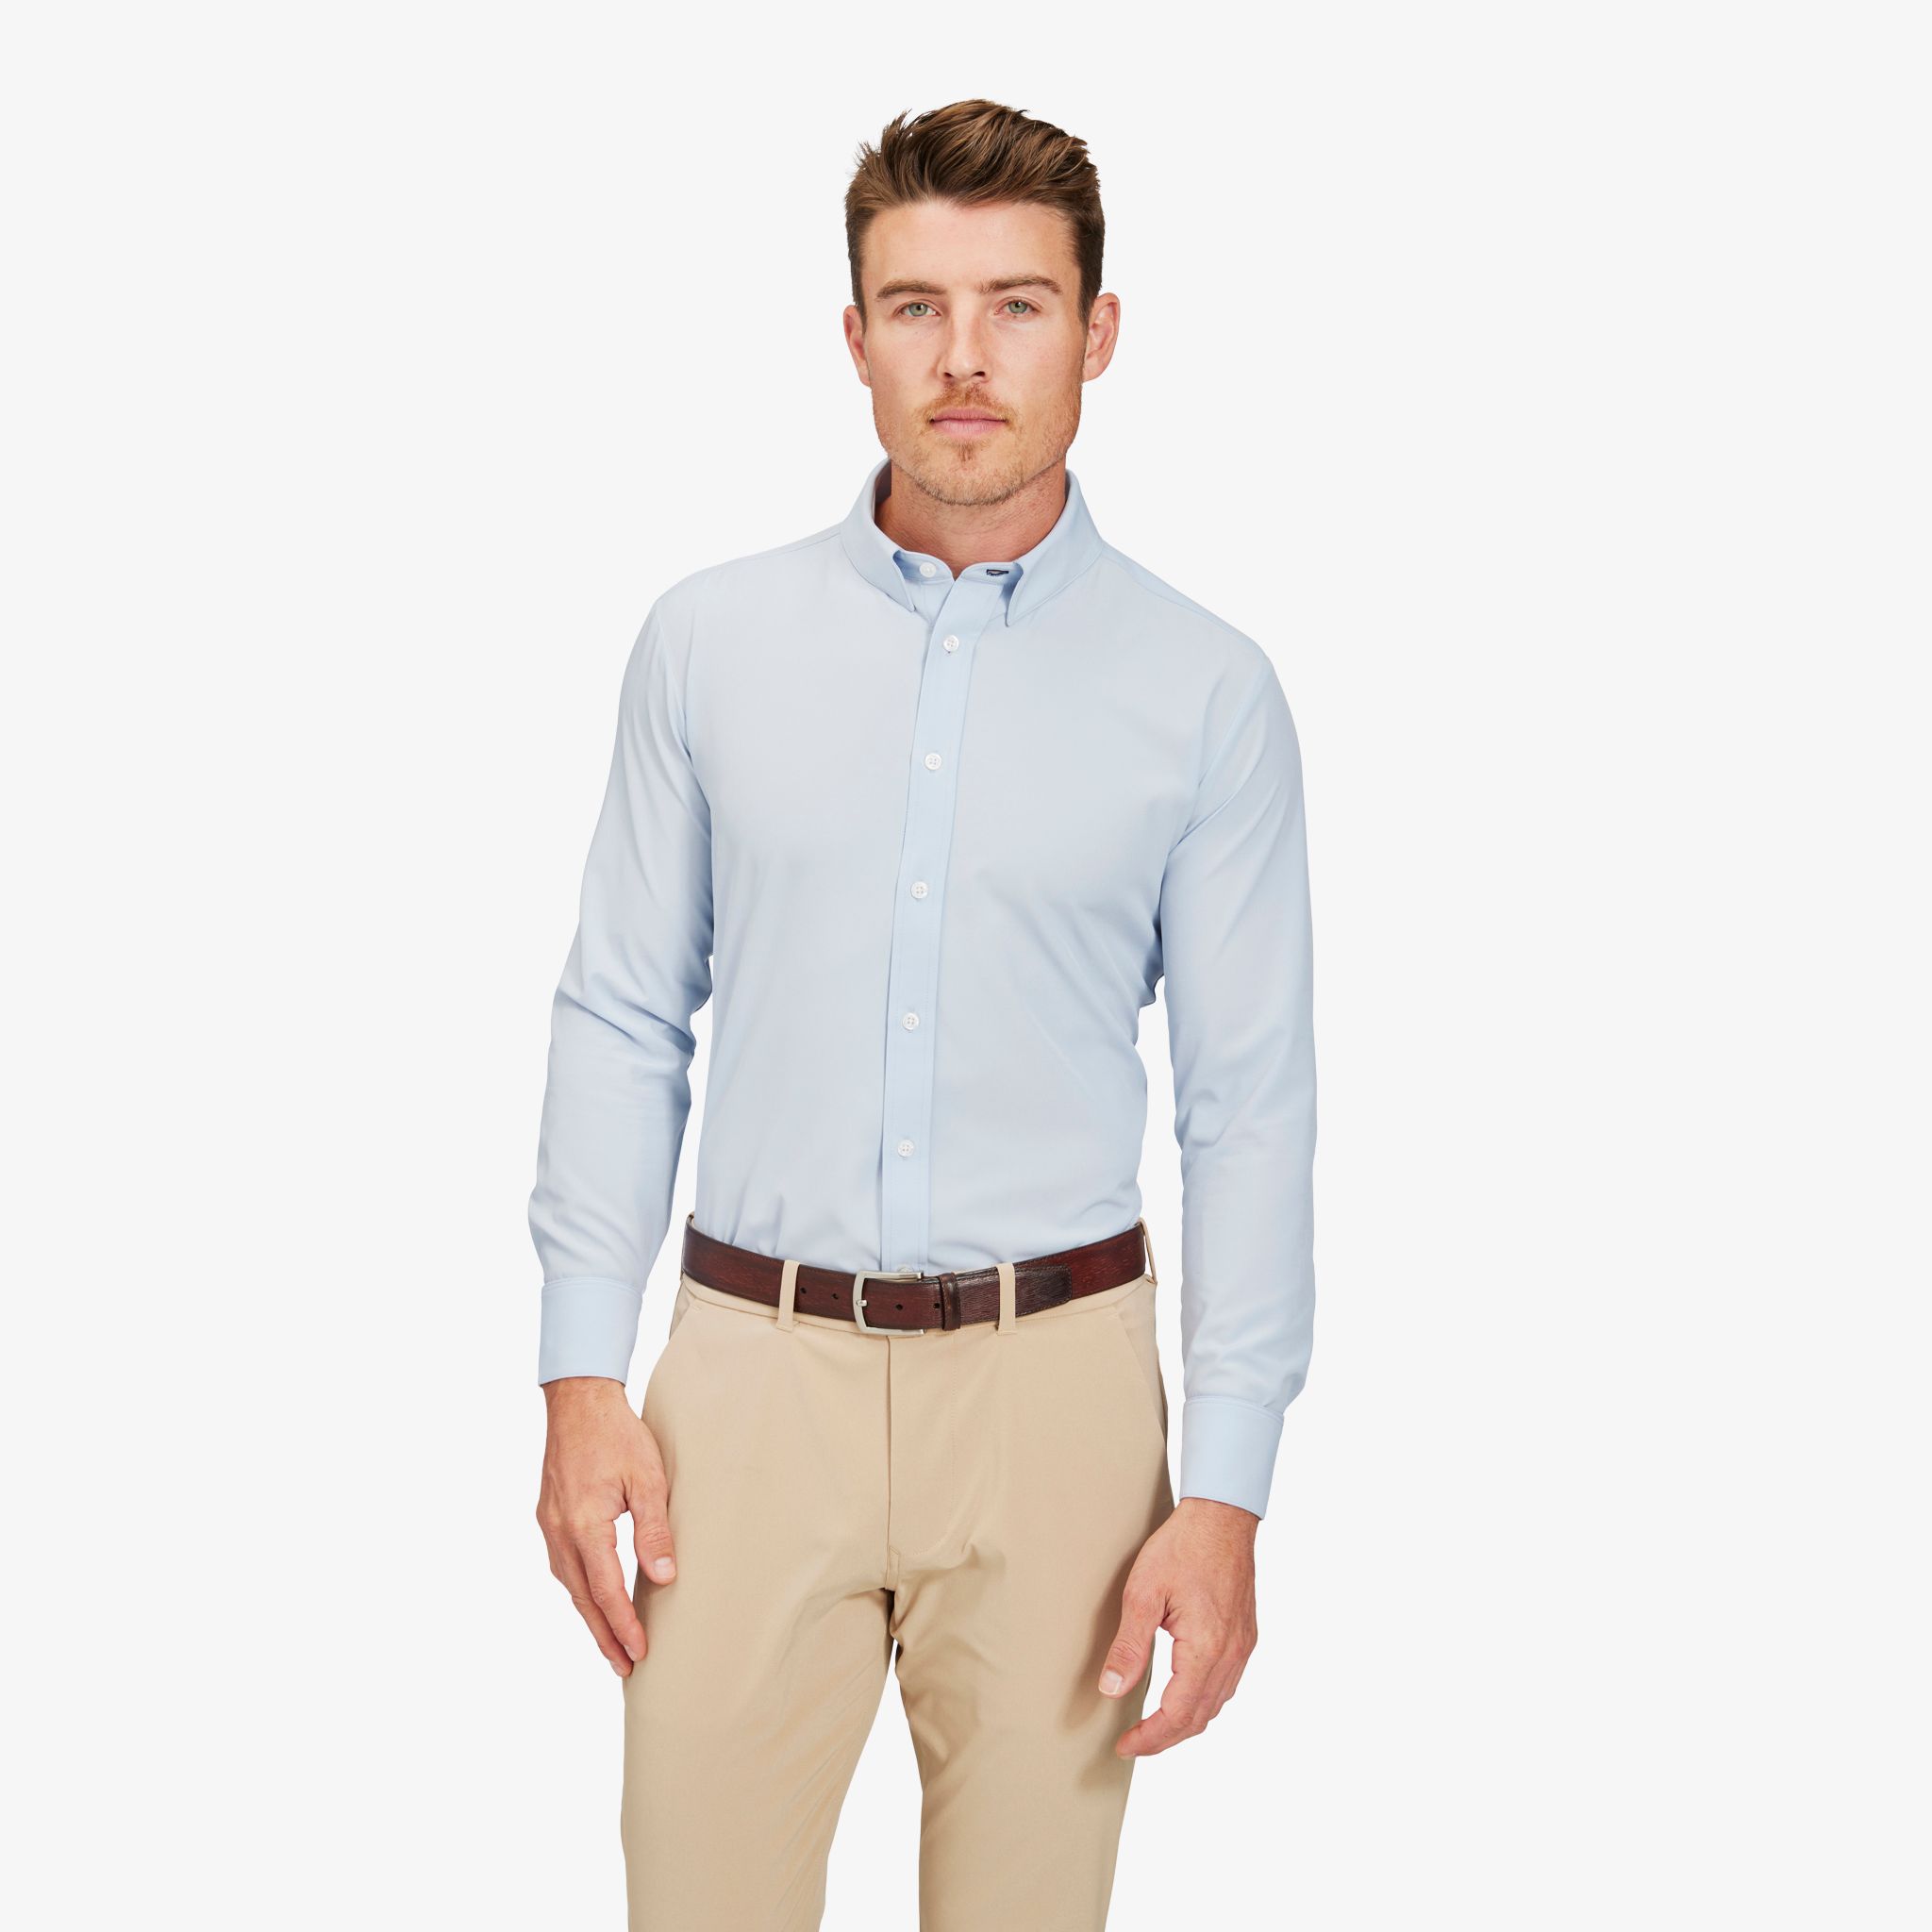 Tom Baine Men's Slim Fit Performance Solid Button Down Shirt - Macy's